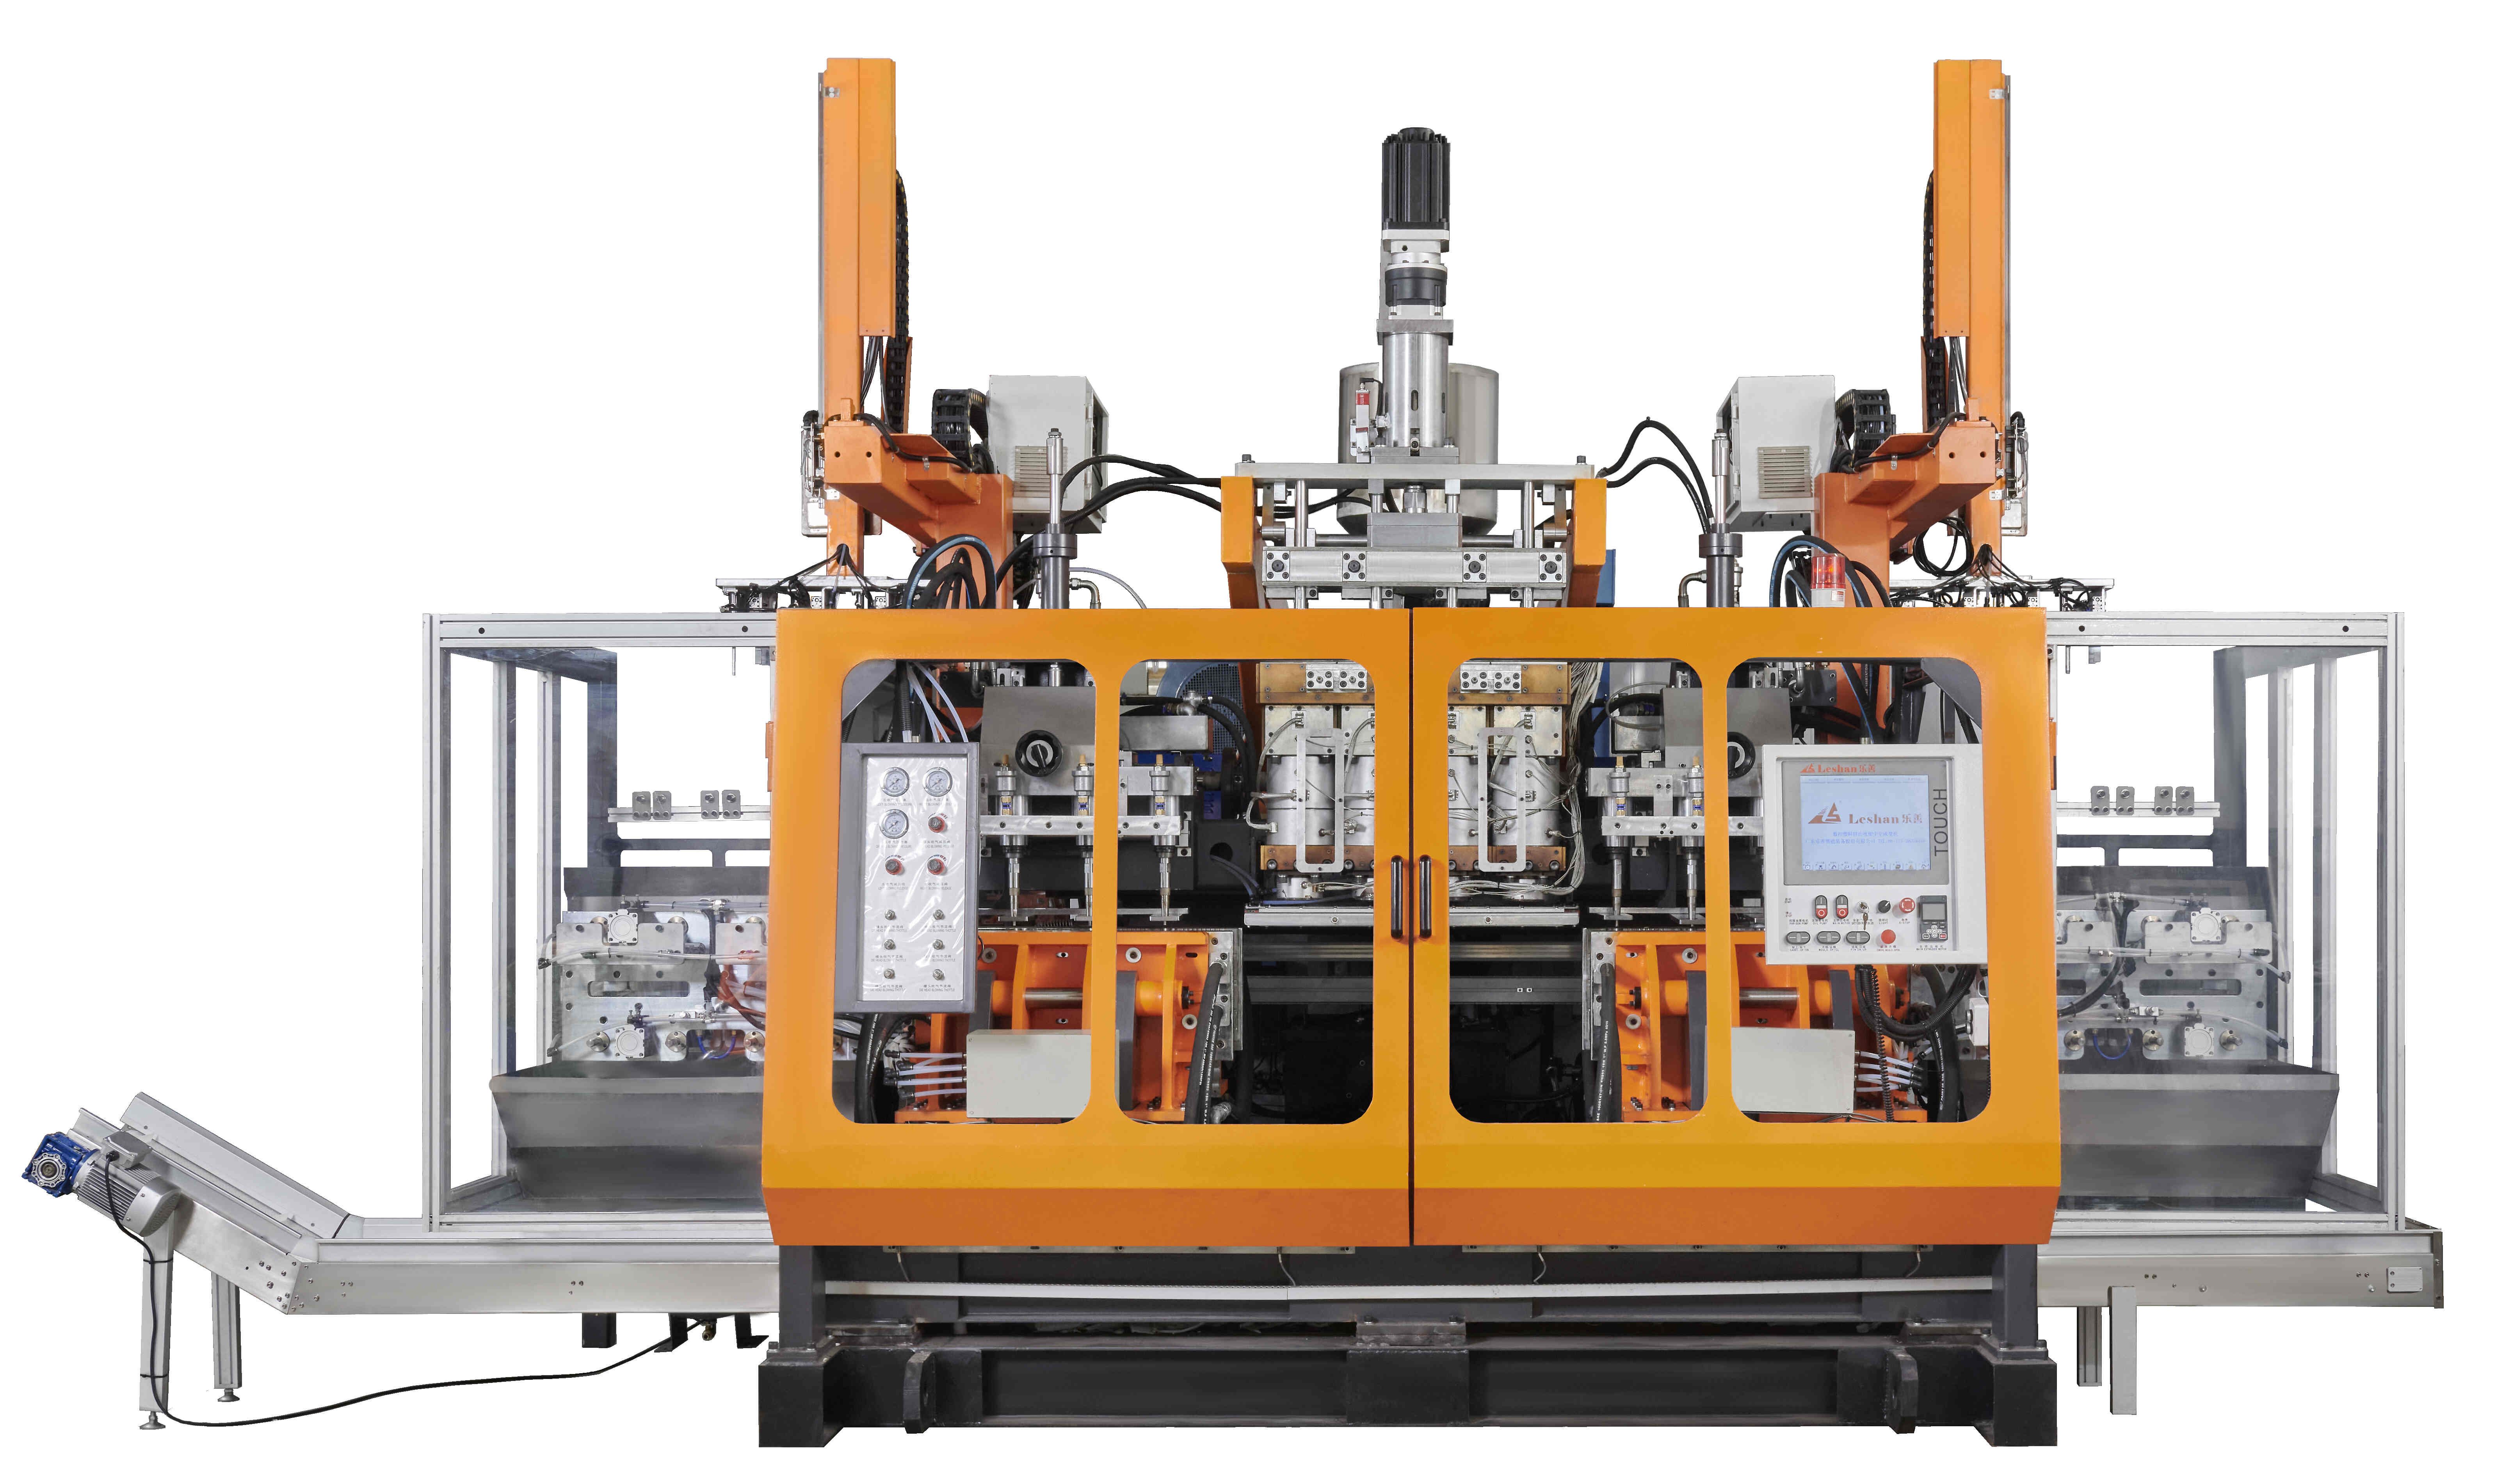 What are the key components of a 2litre bottle blow molding machine?